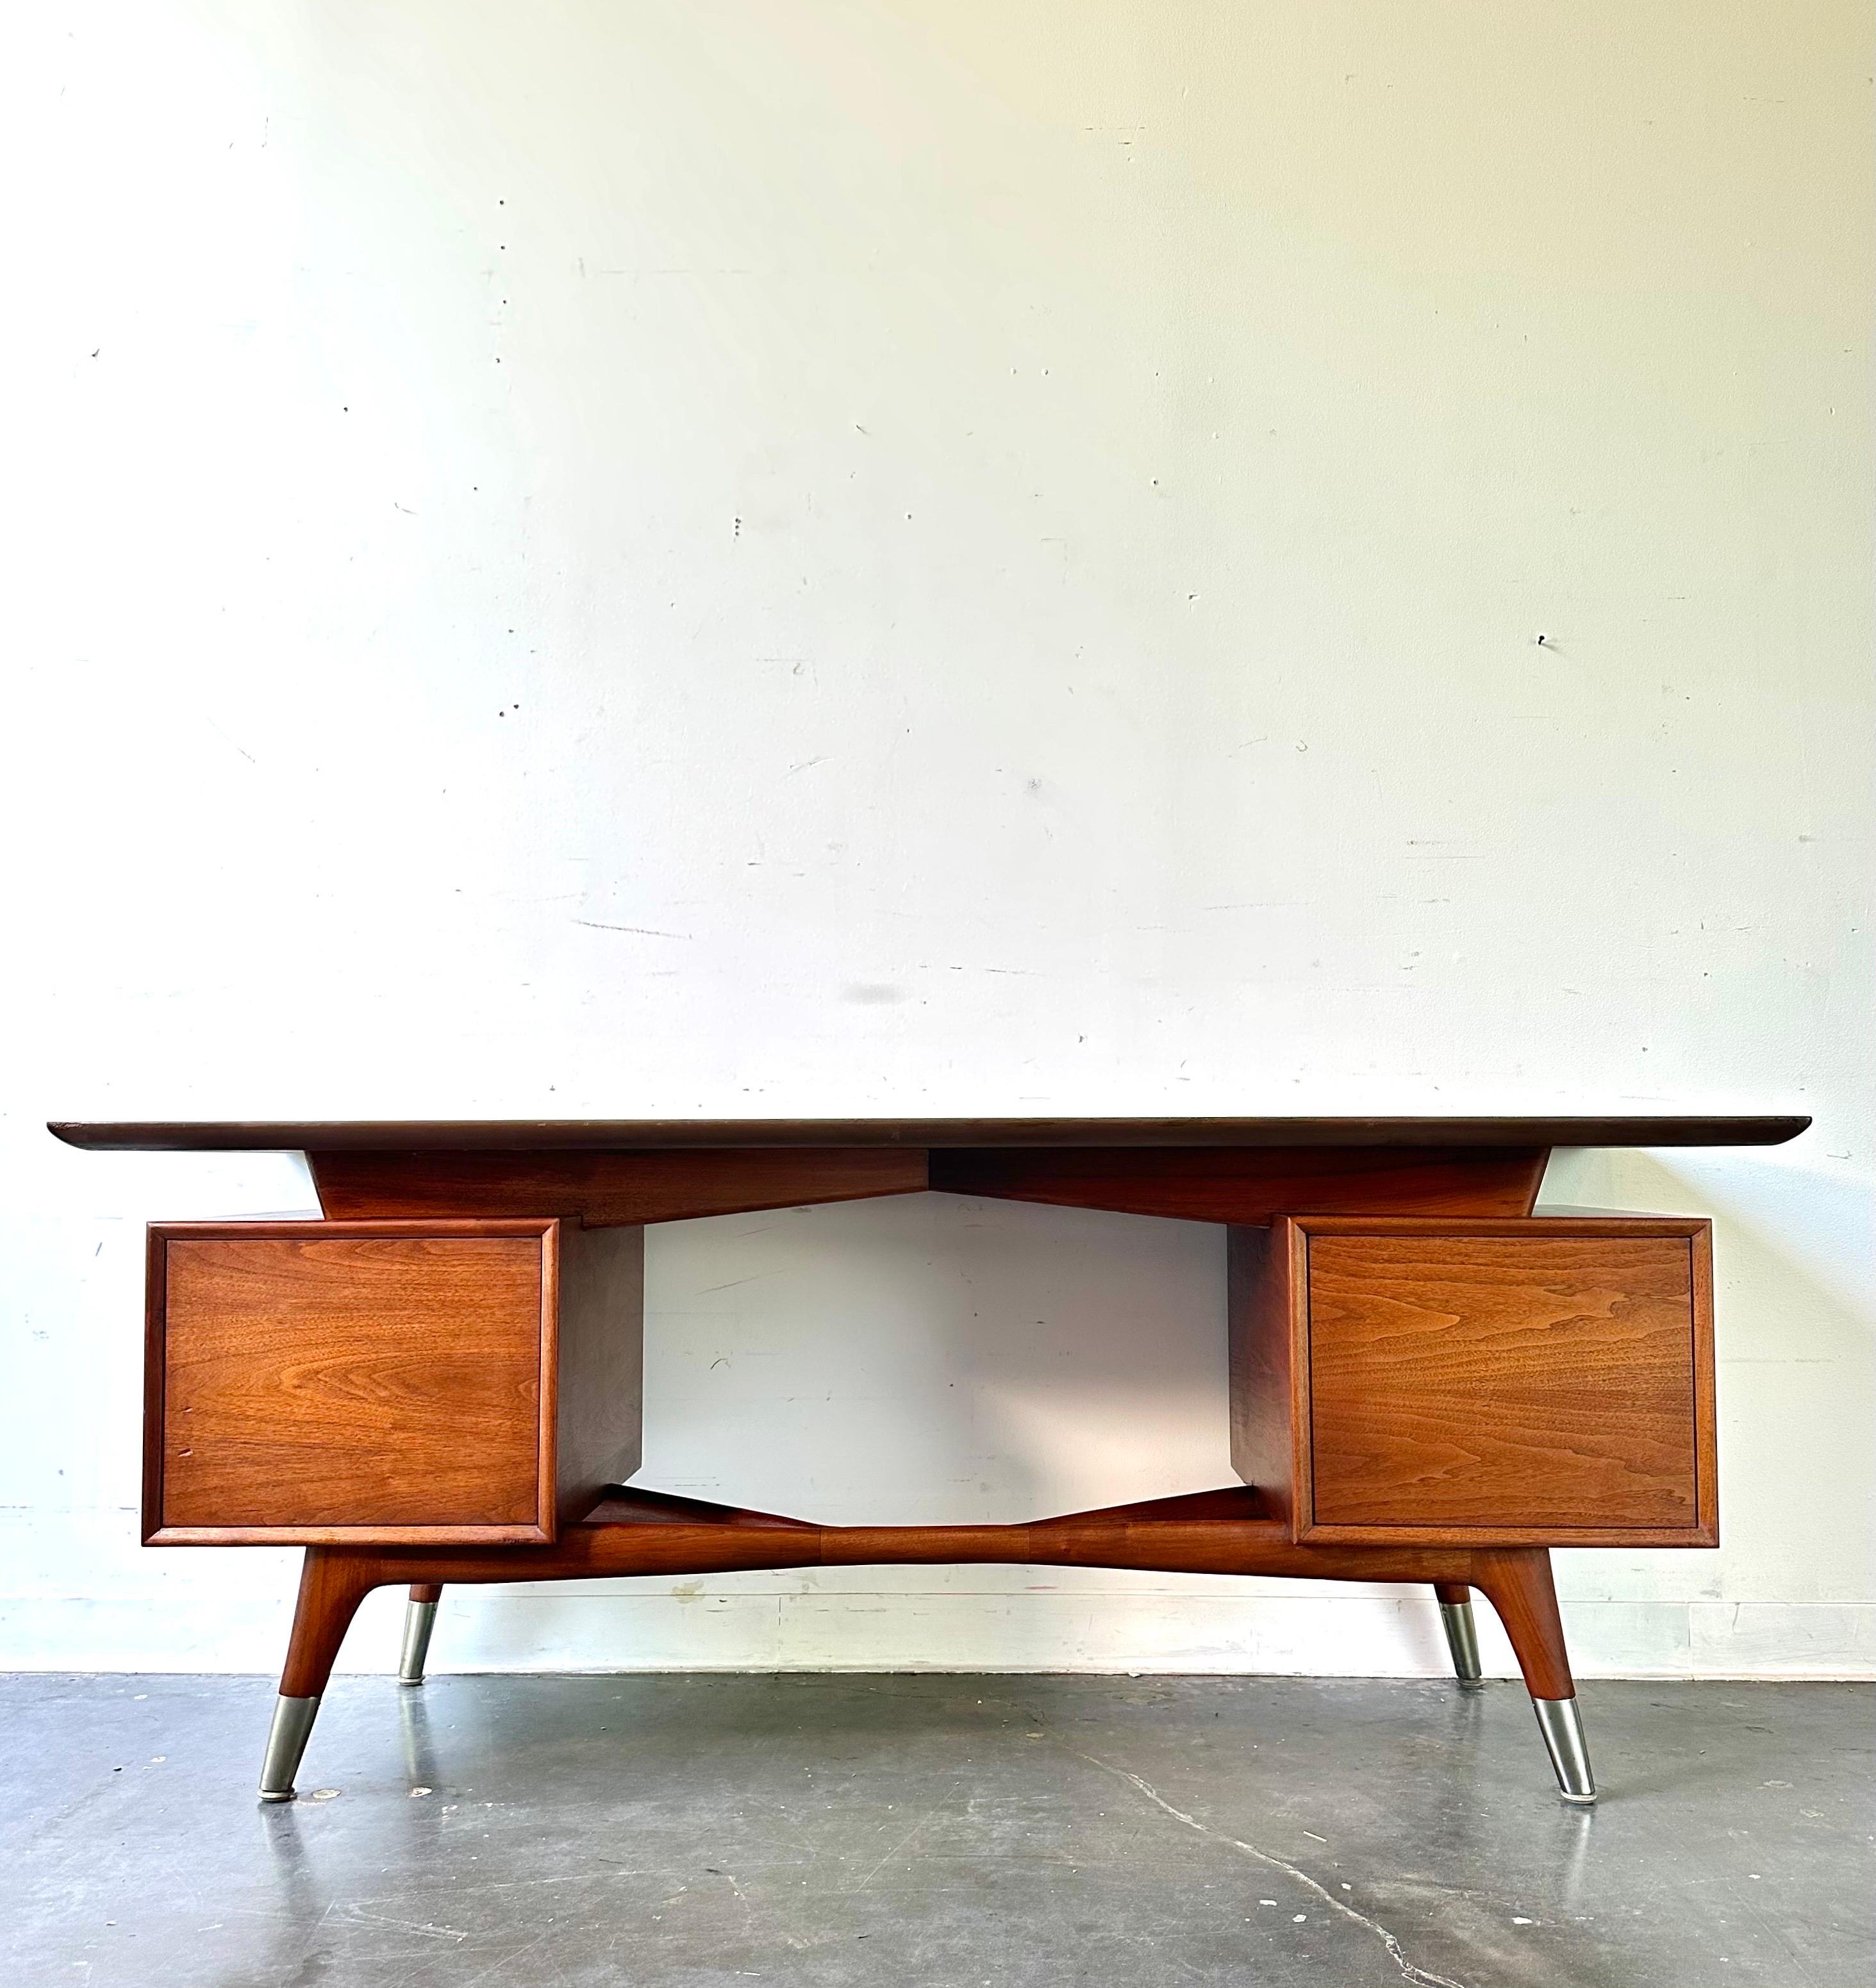 Very rare Skulptura desk by Alma.

Stunning sculptural executive desk with x base and wood grain. 

Sleek lines, one large drawer, and one shelf behind. Tambour door.

Dimensions:
72” L x 24” D x 28” H.